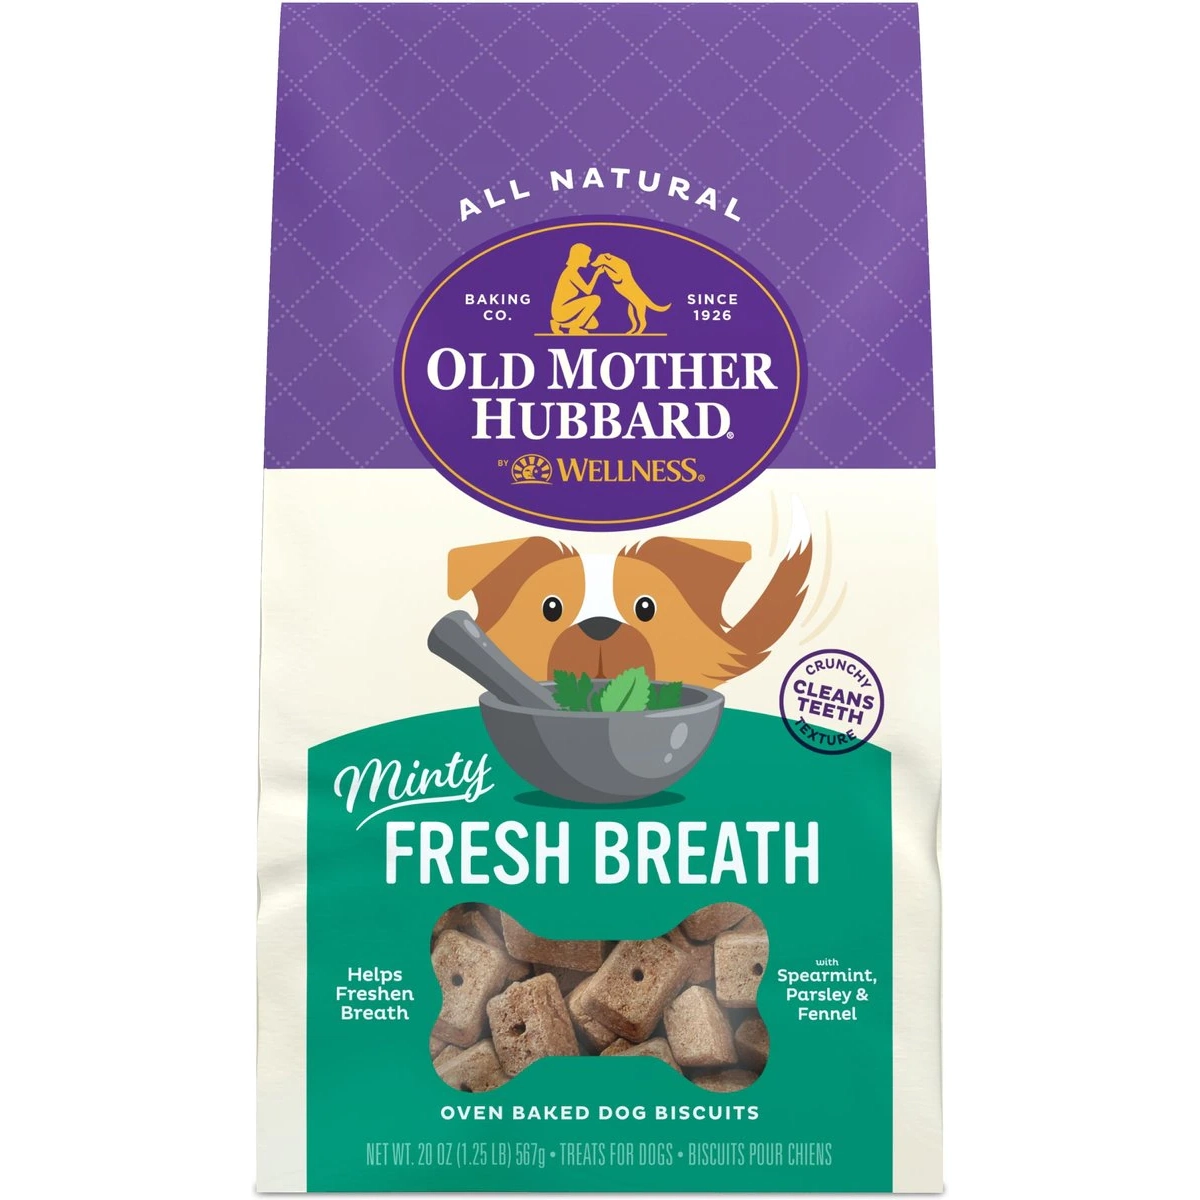 Old Mother Hubbard Minty Fresh Breath Oven-Baked Biscuits Dog Treats 